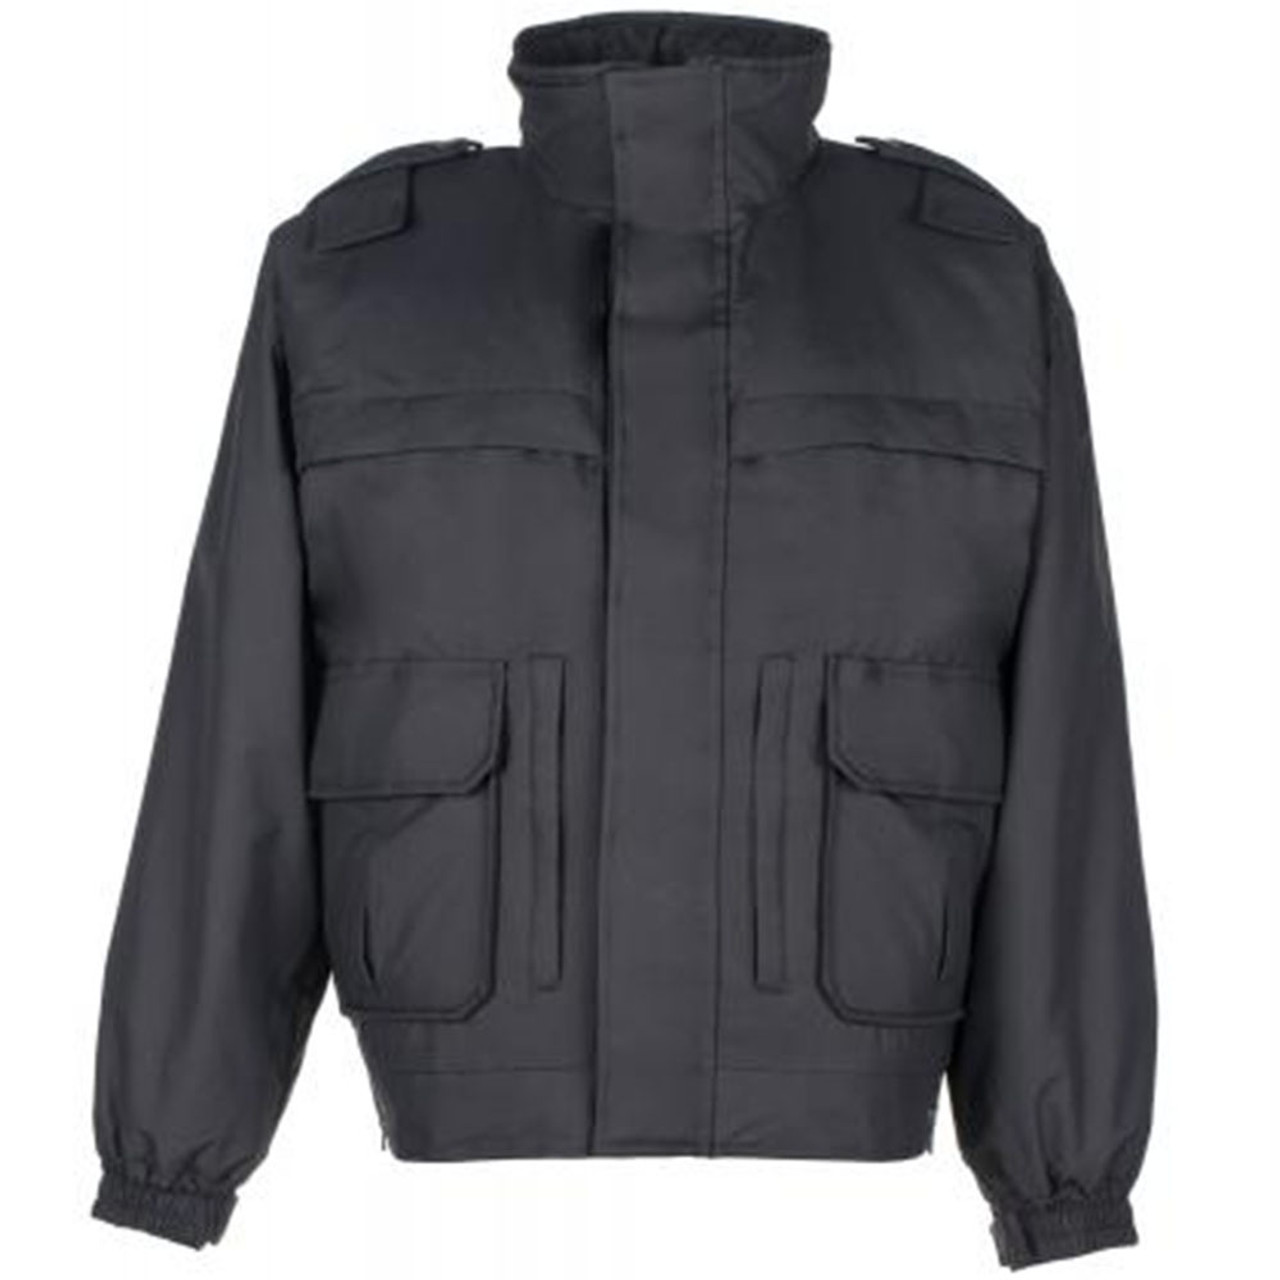 Spiewak SH3466 WeatherTech Systems Airflow Duty Jacket, Uniform, waterproof, windproof, breathable, available in Black, Dark Navy Blue, Police Green, Brown, Optional Drop-Down Panels (2 Front, 1 Back)